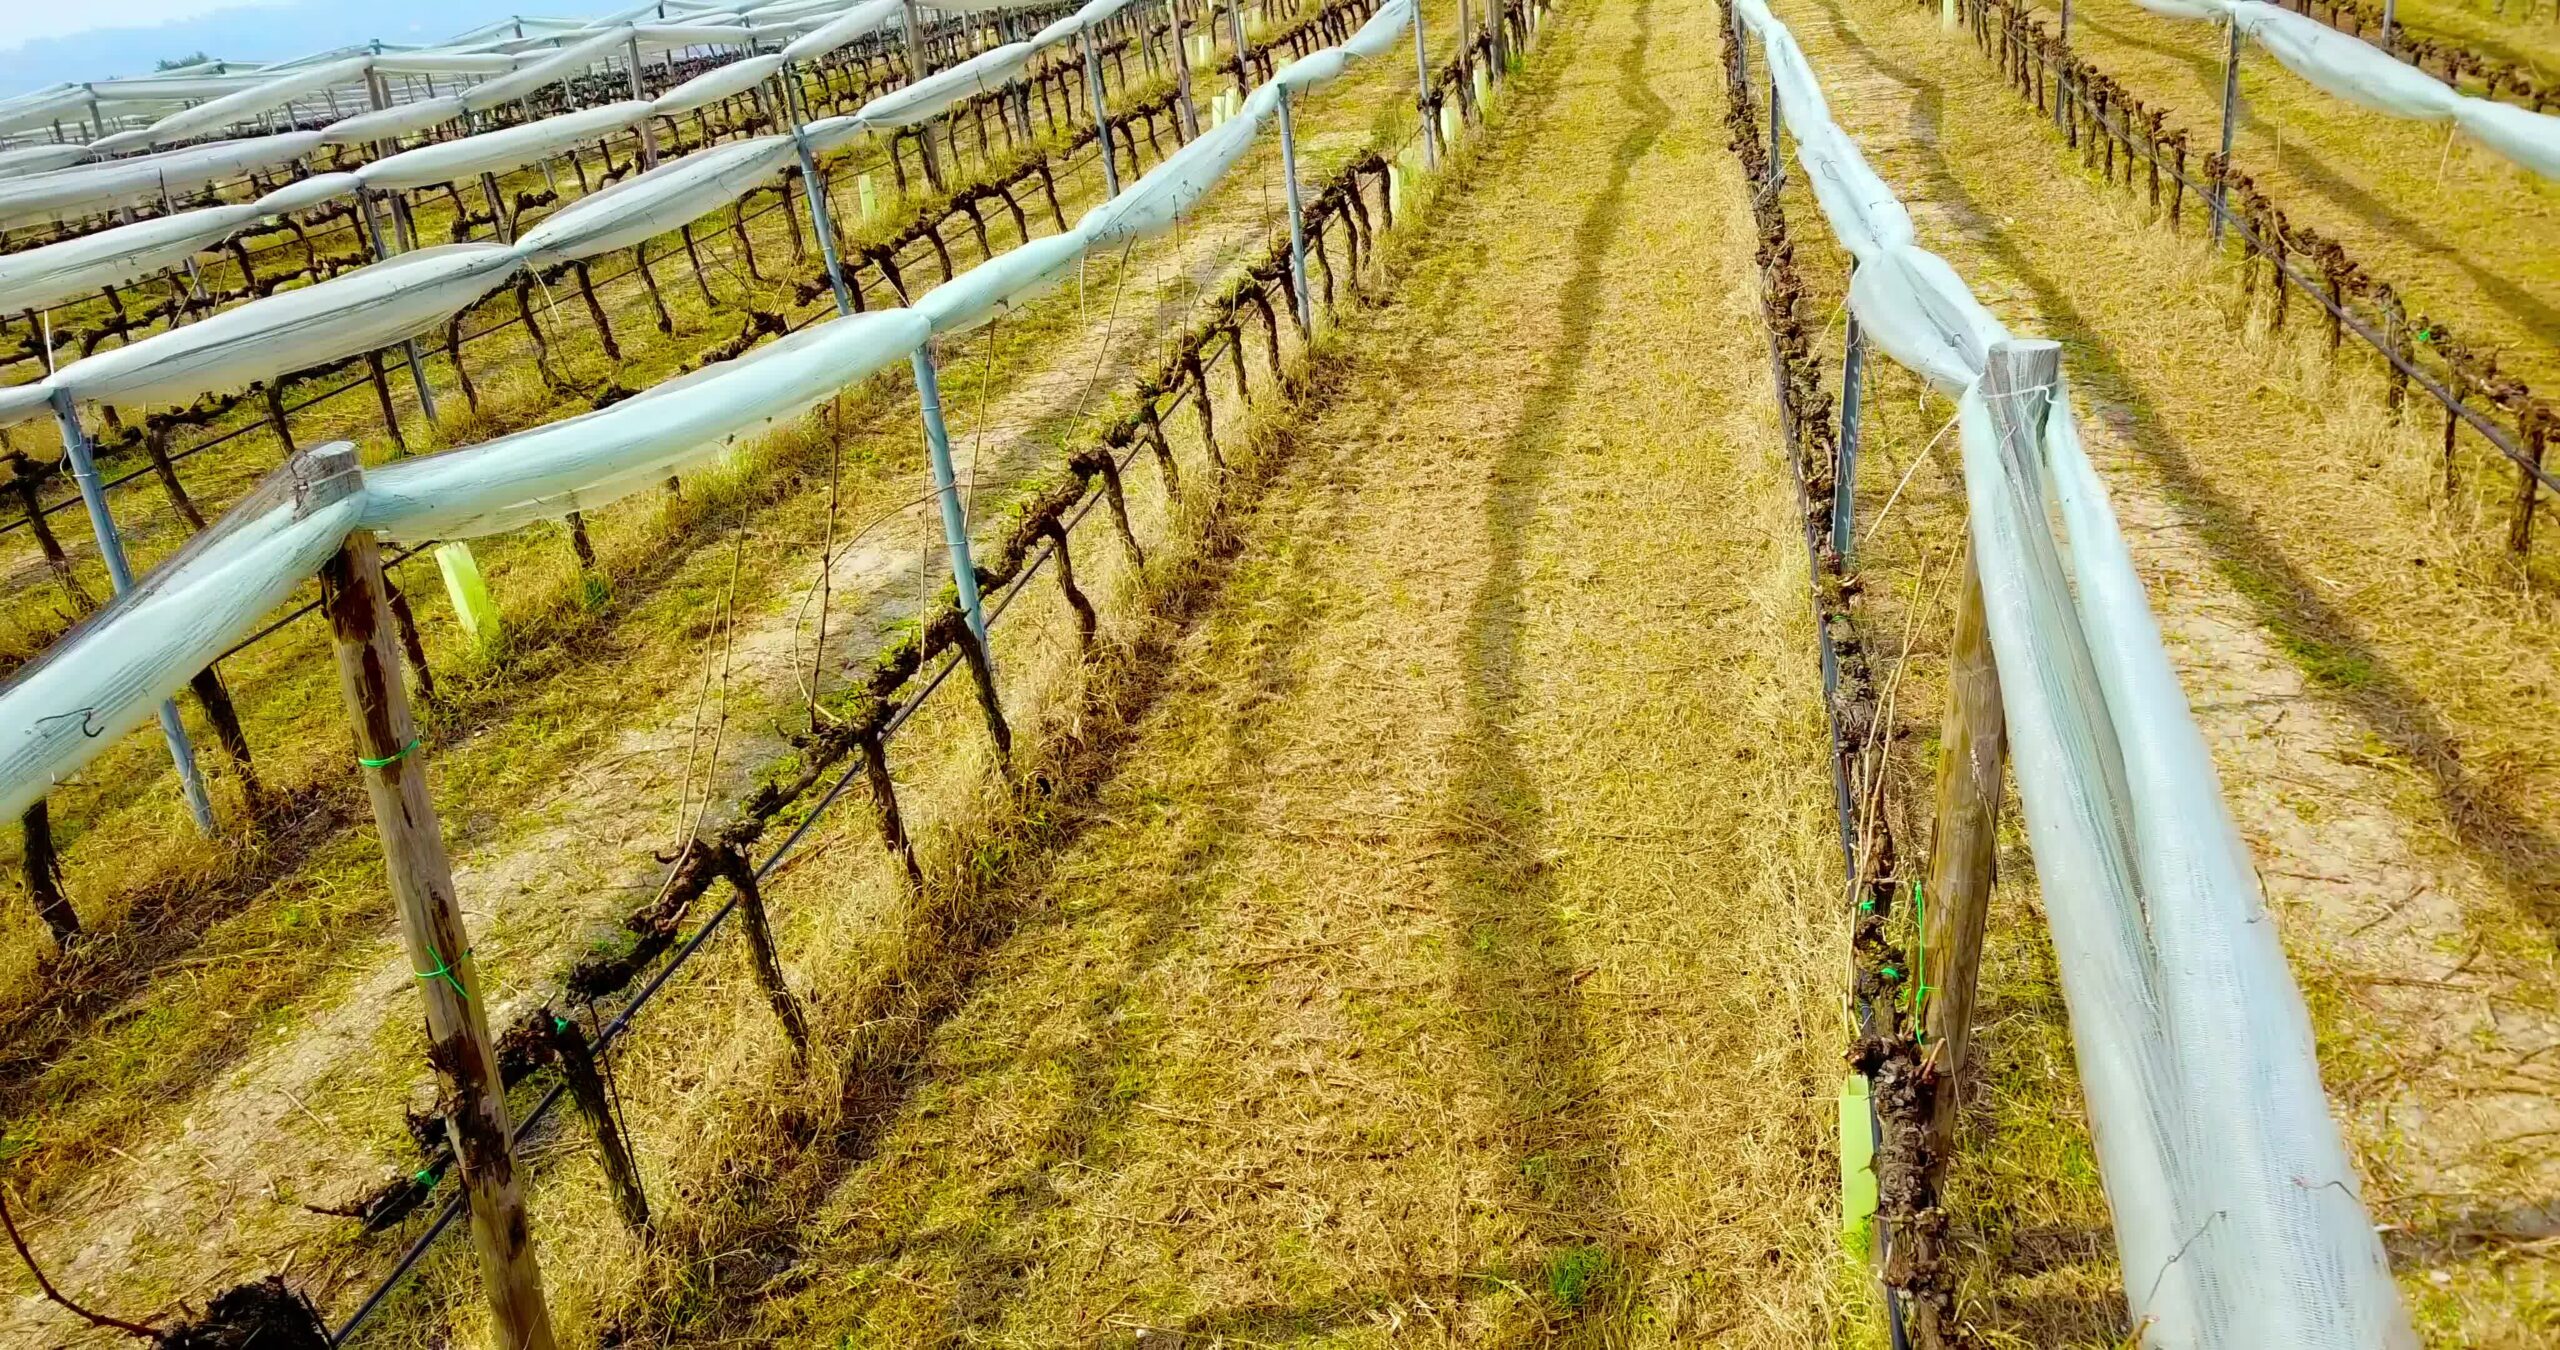 Grape vine rows in wide vineyard with white folded nets